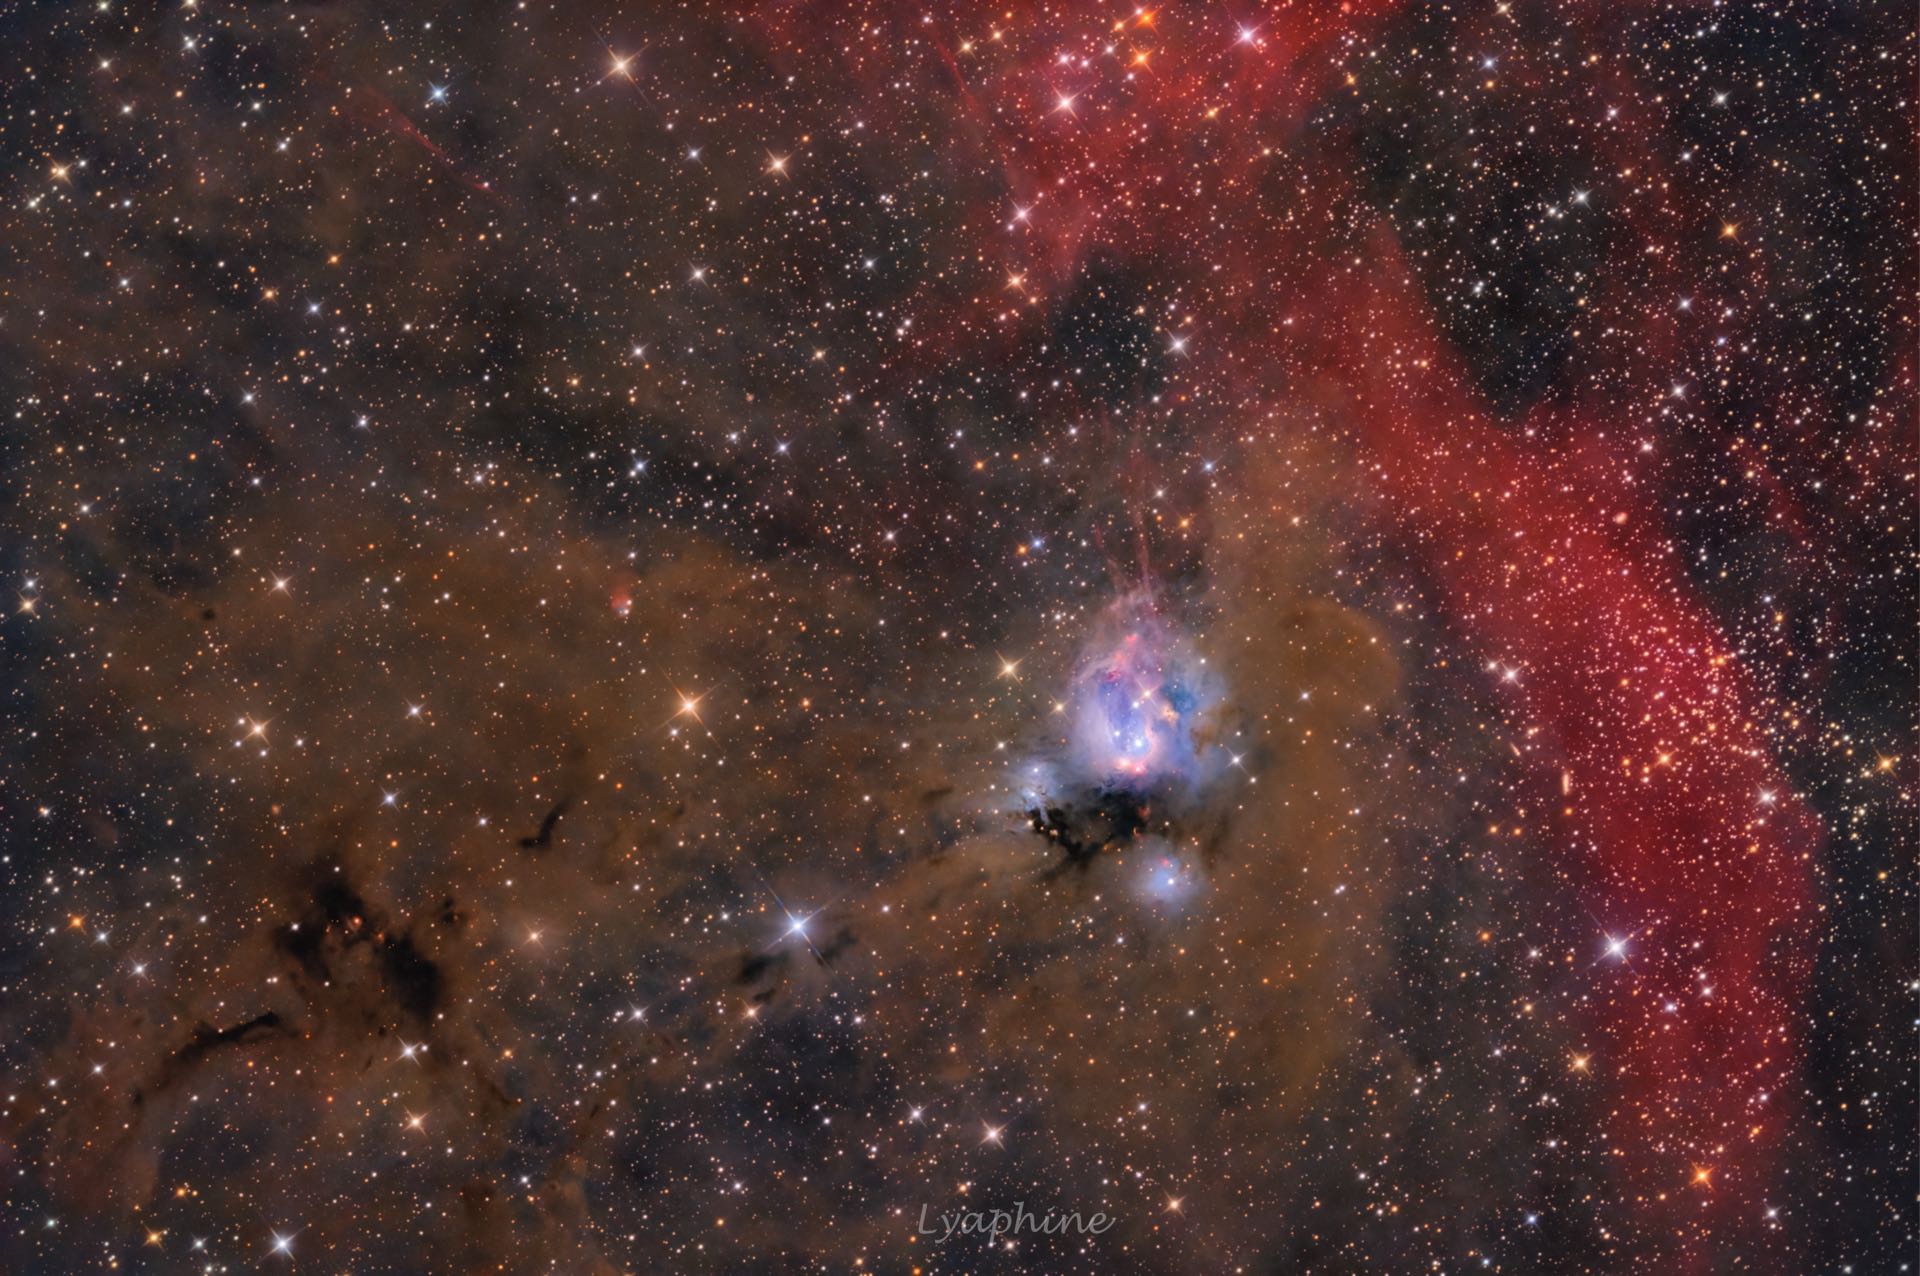 NGC 7129 and Rebpau1, photographed by Sophie Paulin. Rebpau1 is the suspected planetary nebula in the left third of the image, approximately level with NGC 7129.